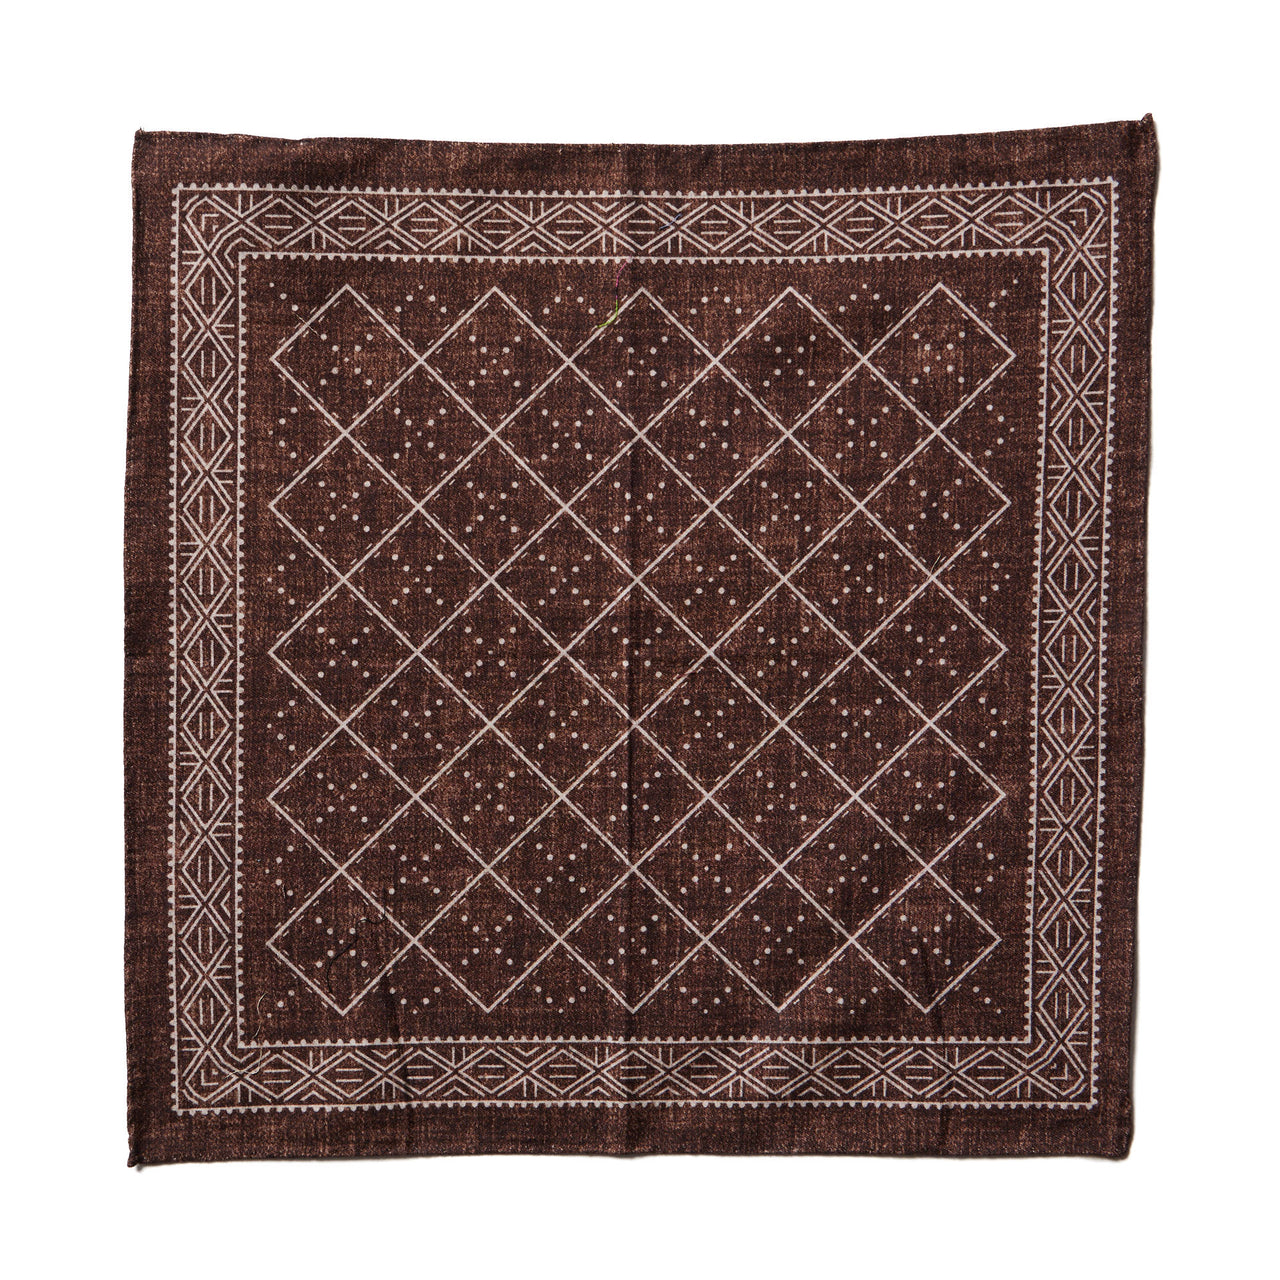 HENRY SARTORIAL X CANTINI Cotton Pocket Square BROWN